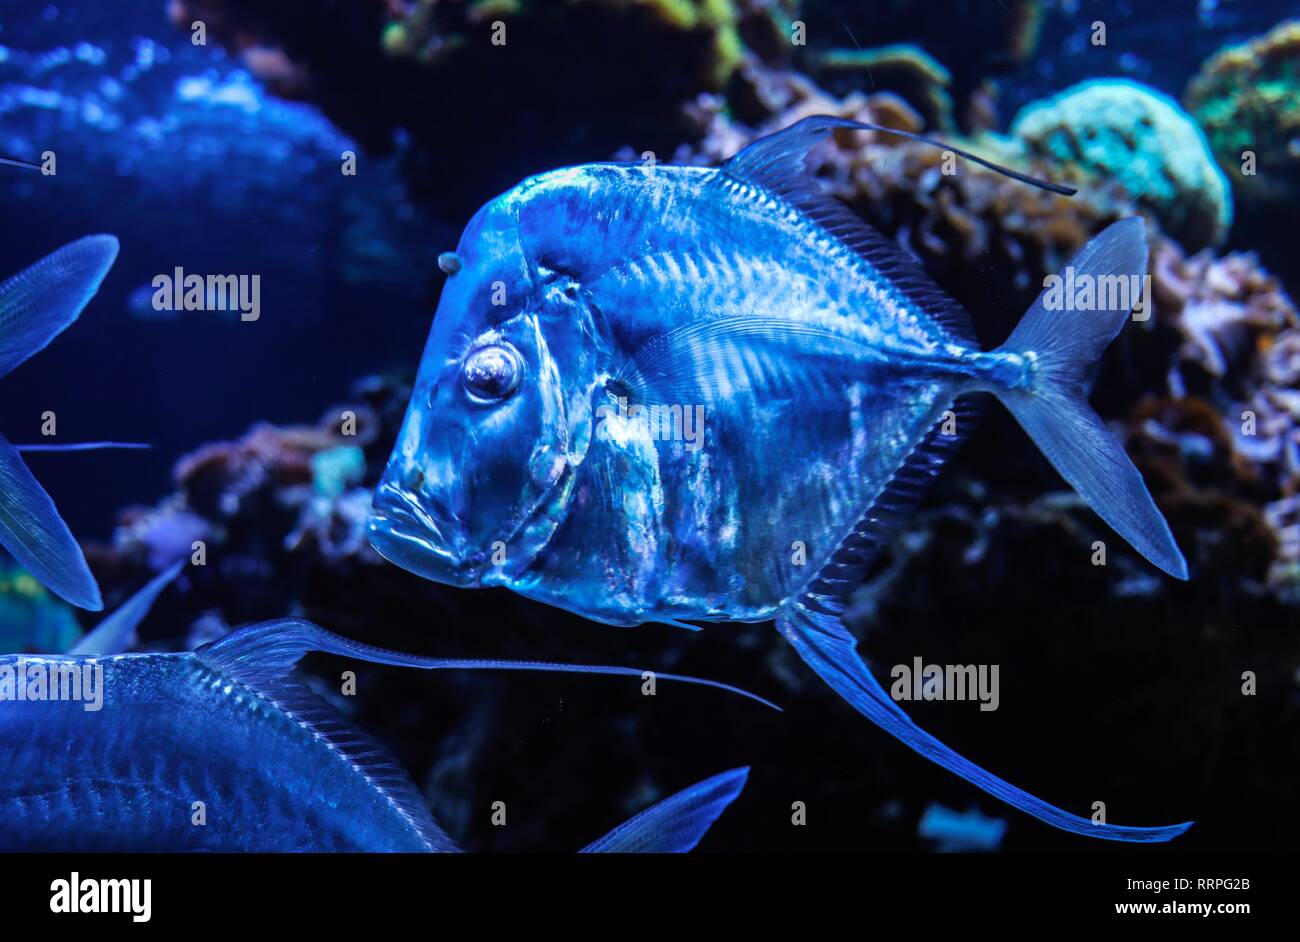 deep sea fish portrait blue and shimmering Stock Photo